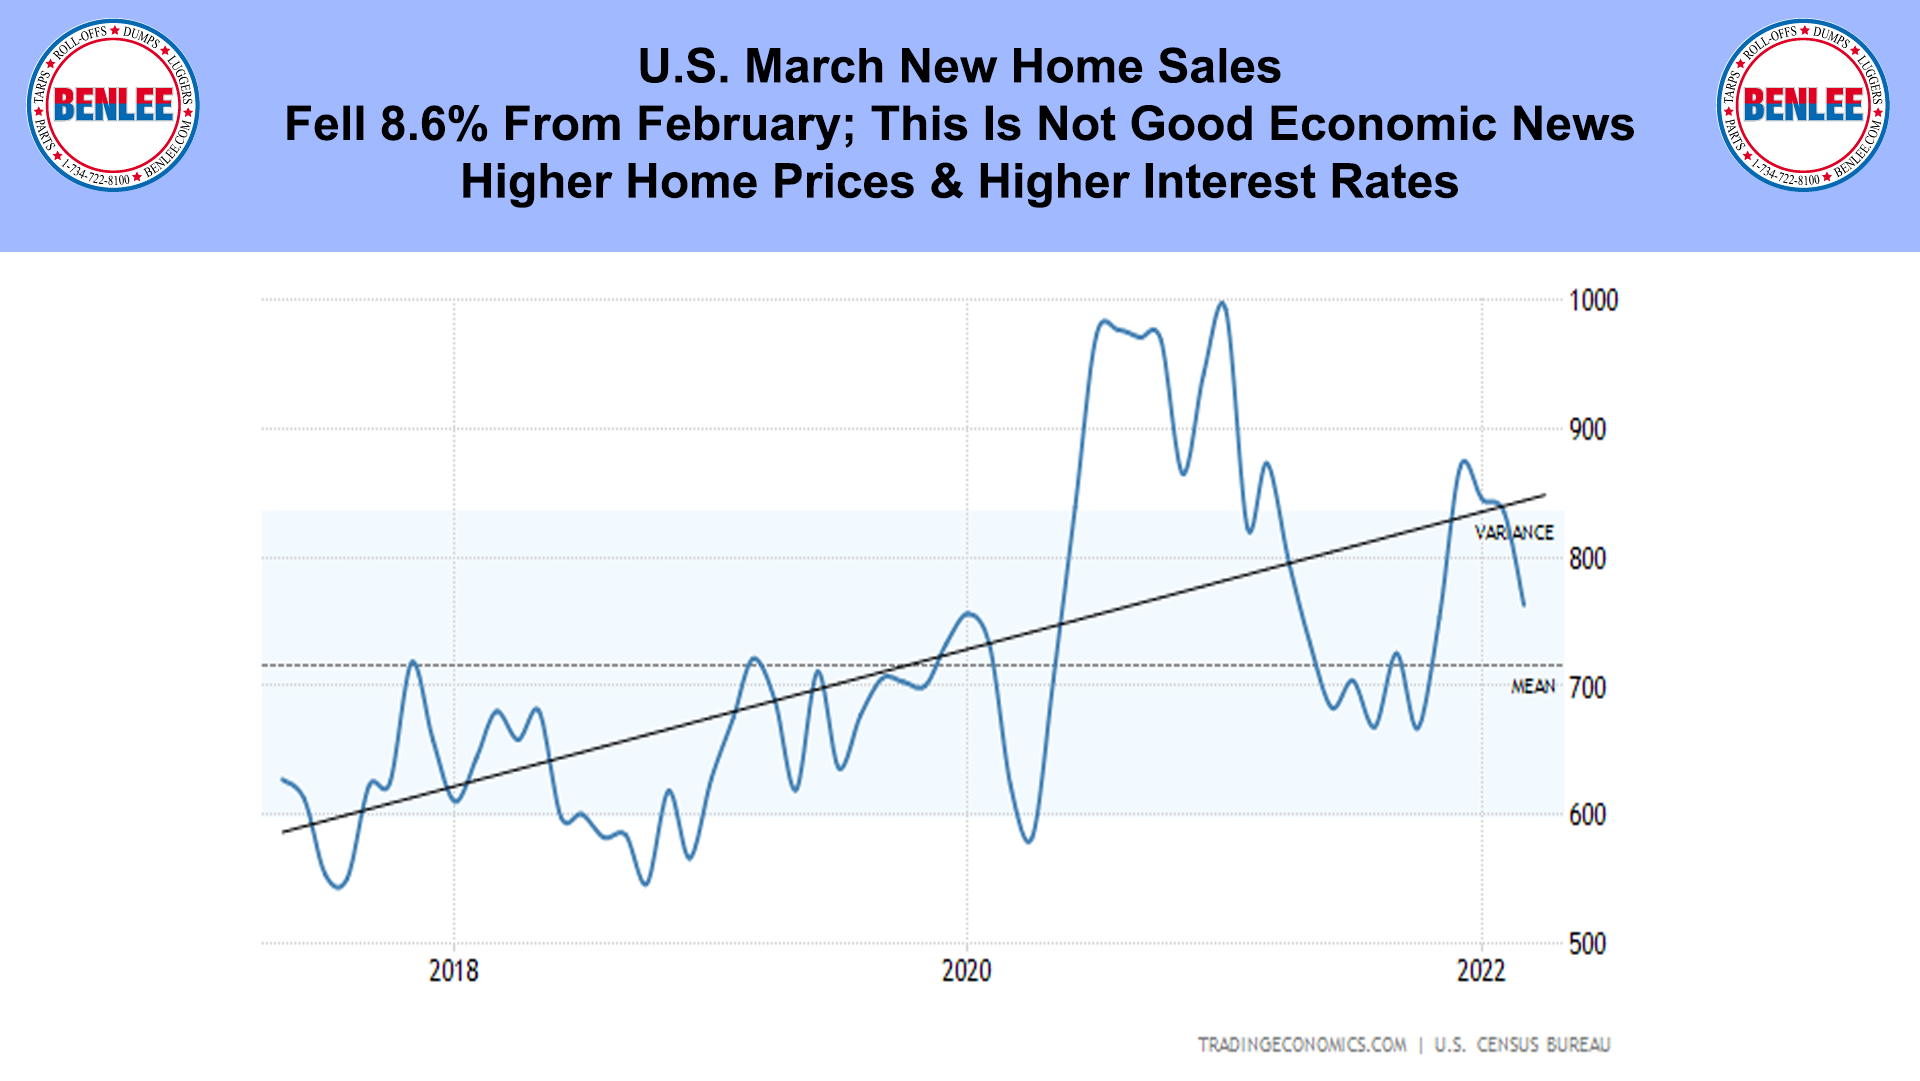 U.S. March New Home Sales